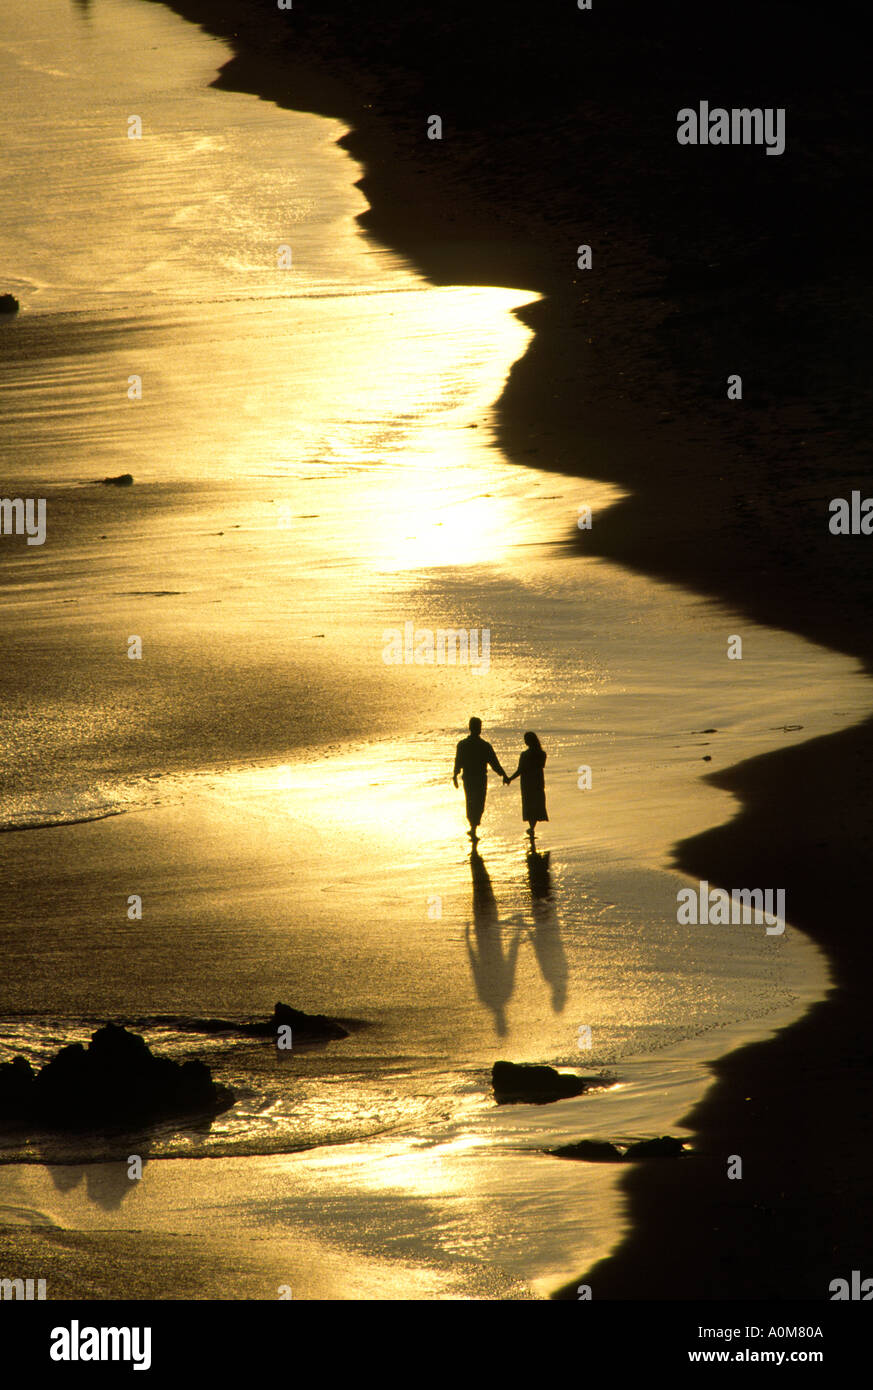 Couple walking on beach at sunset Banque D'Images